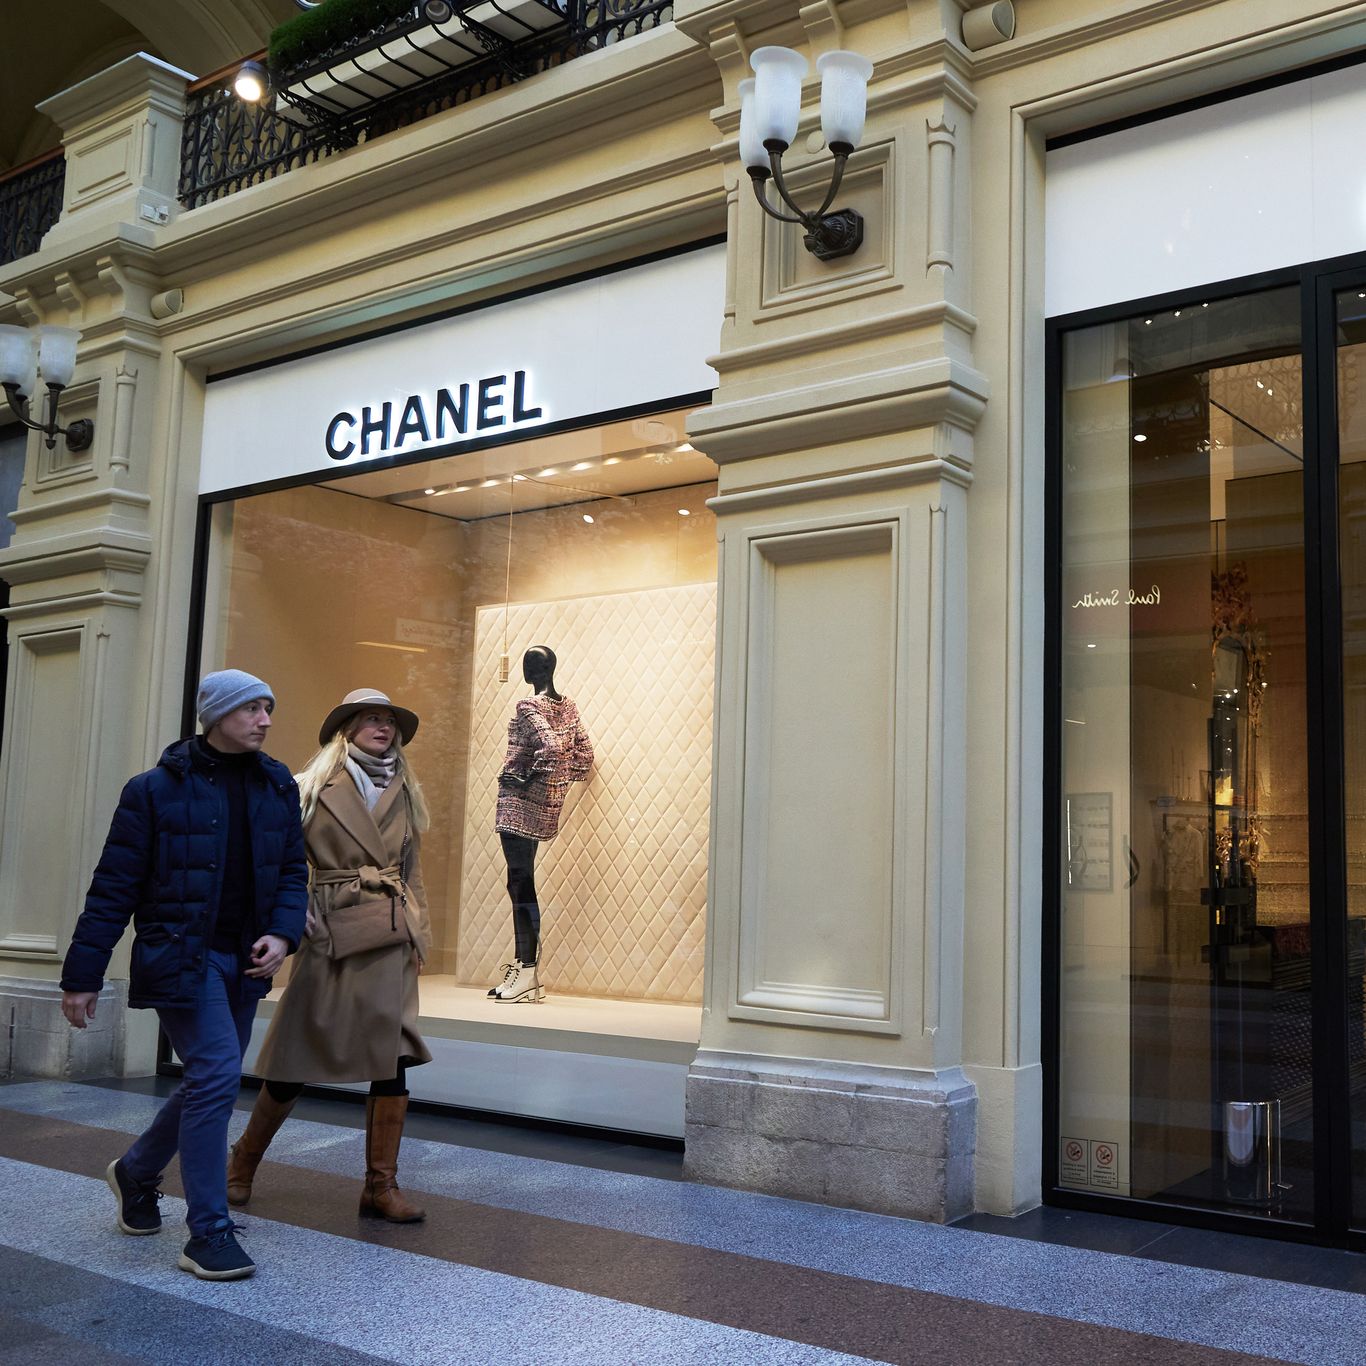 Ukraine war: Chanel restricts sales of goods to Russians abroad - BBC News